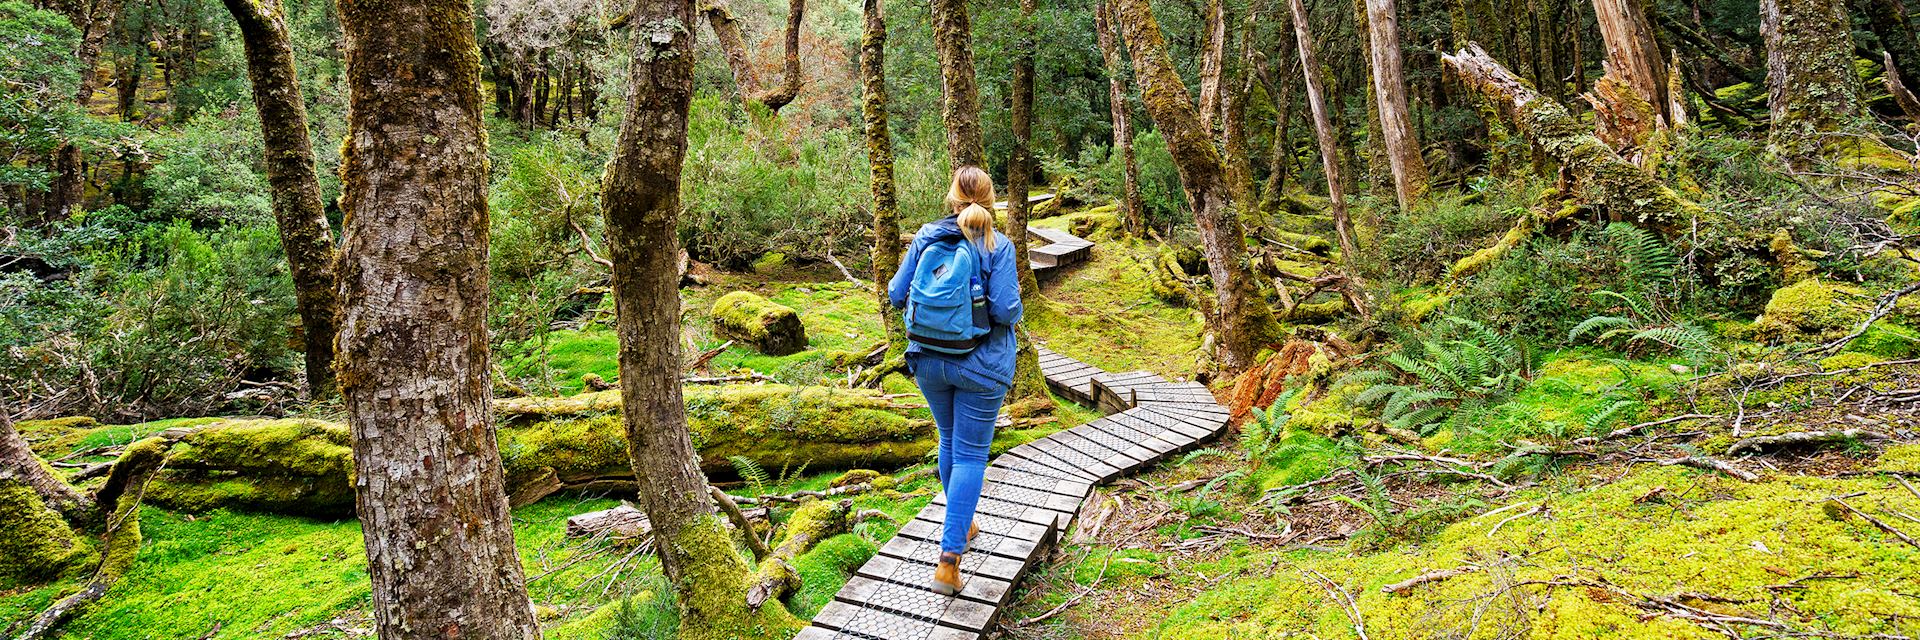 Hiking in Cradle Mountain – Lake St Clair National Park